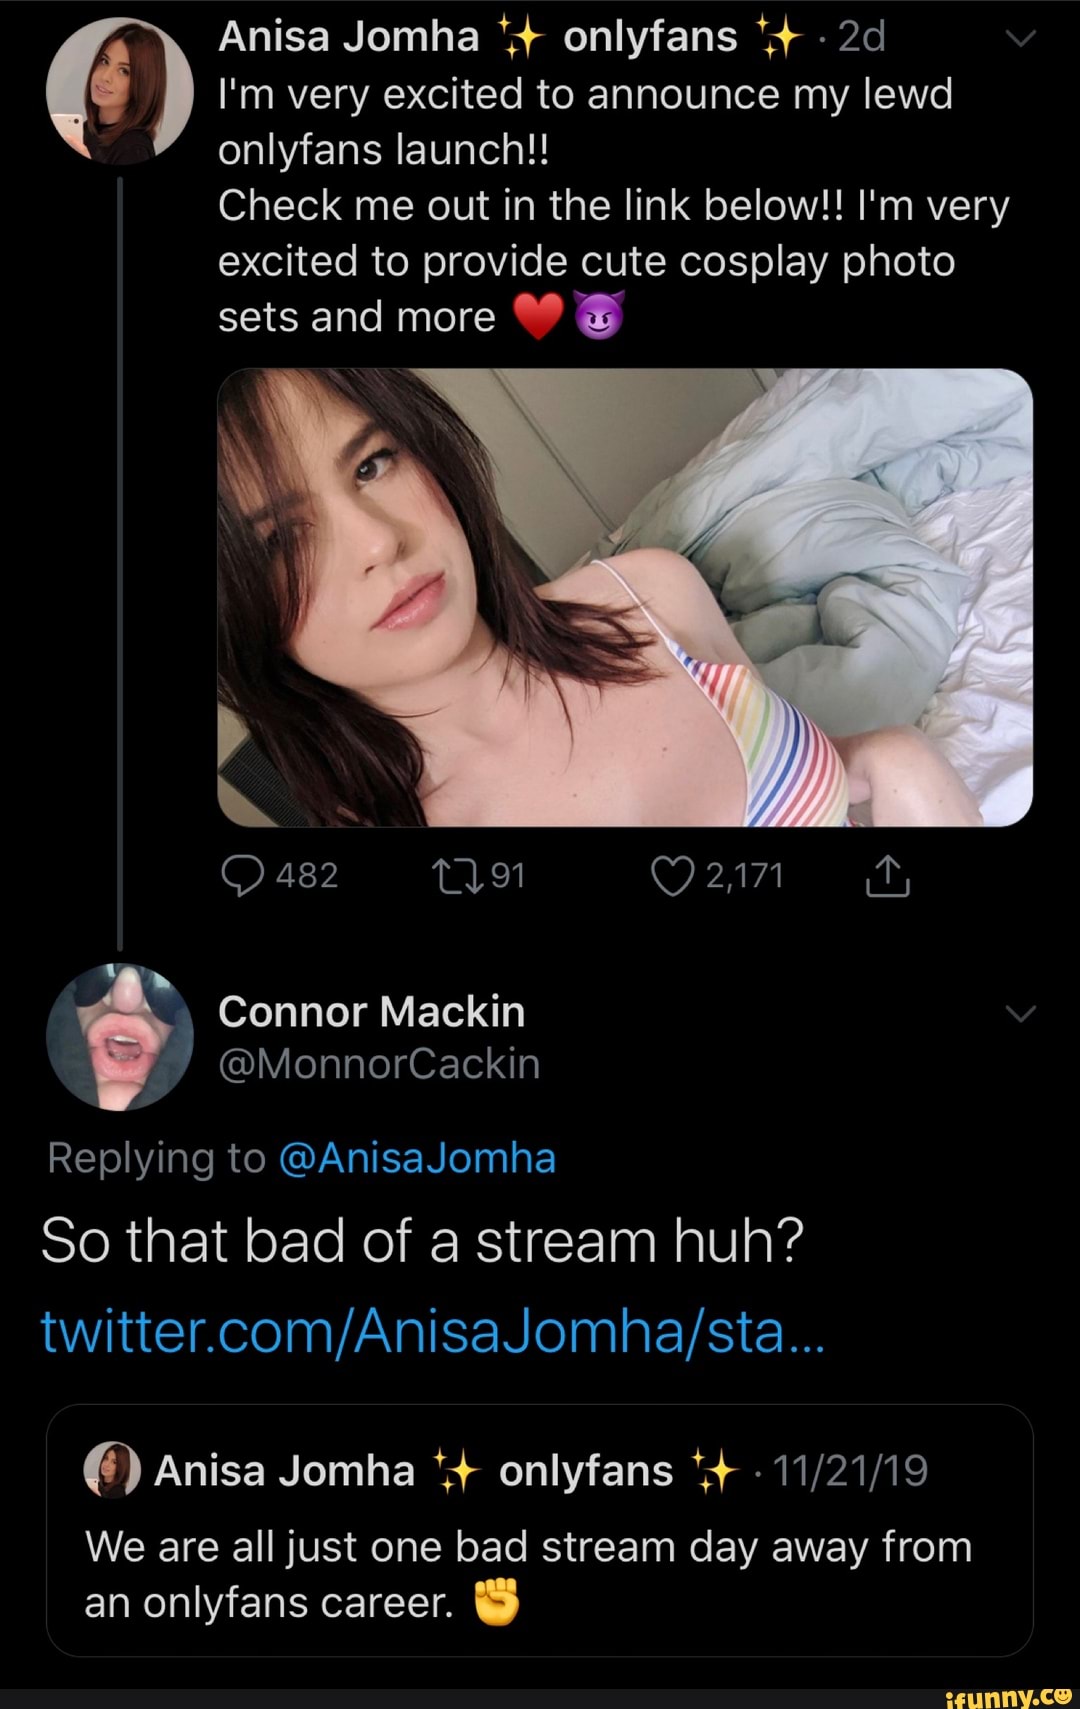 annette mcculley recommends Anisa Jomha Onlyfans